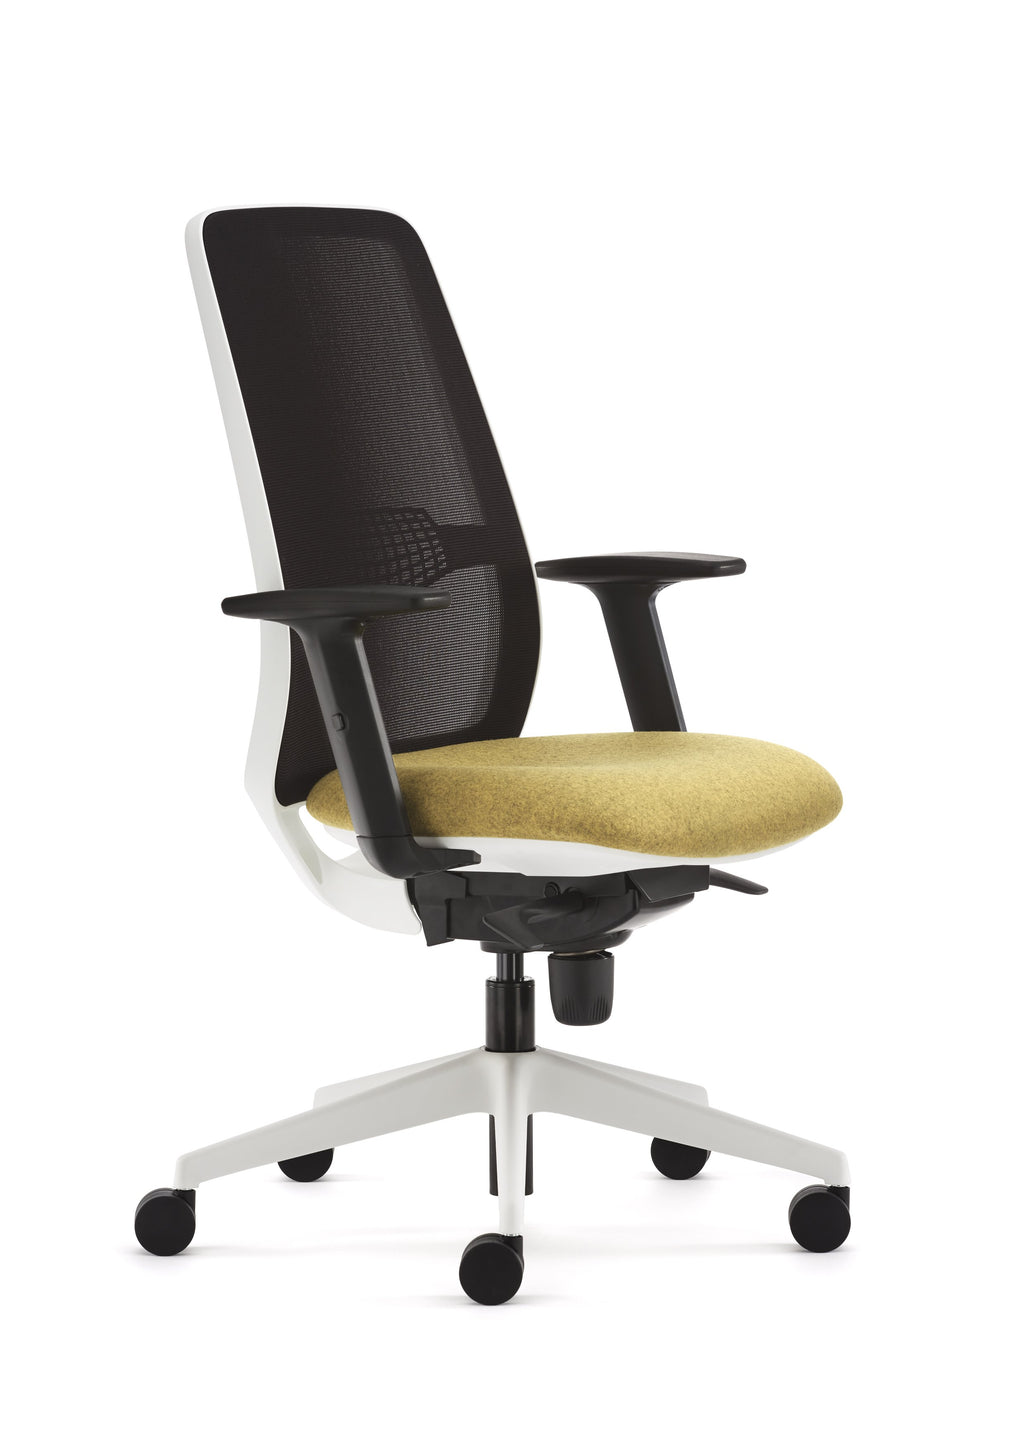 Eclipse Executive Task chair